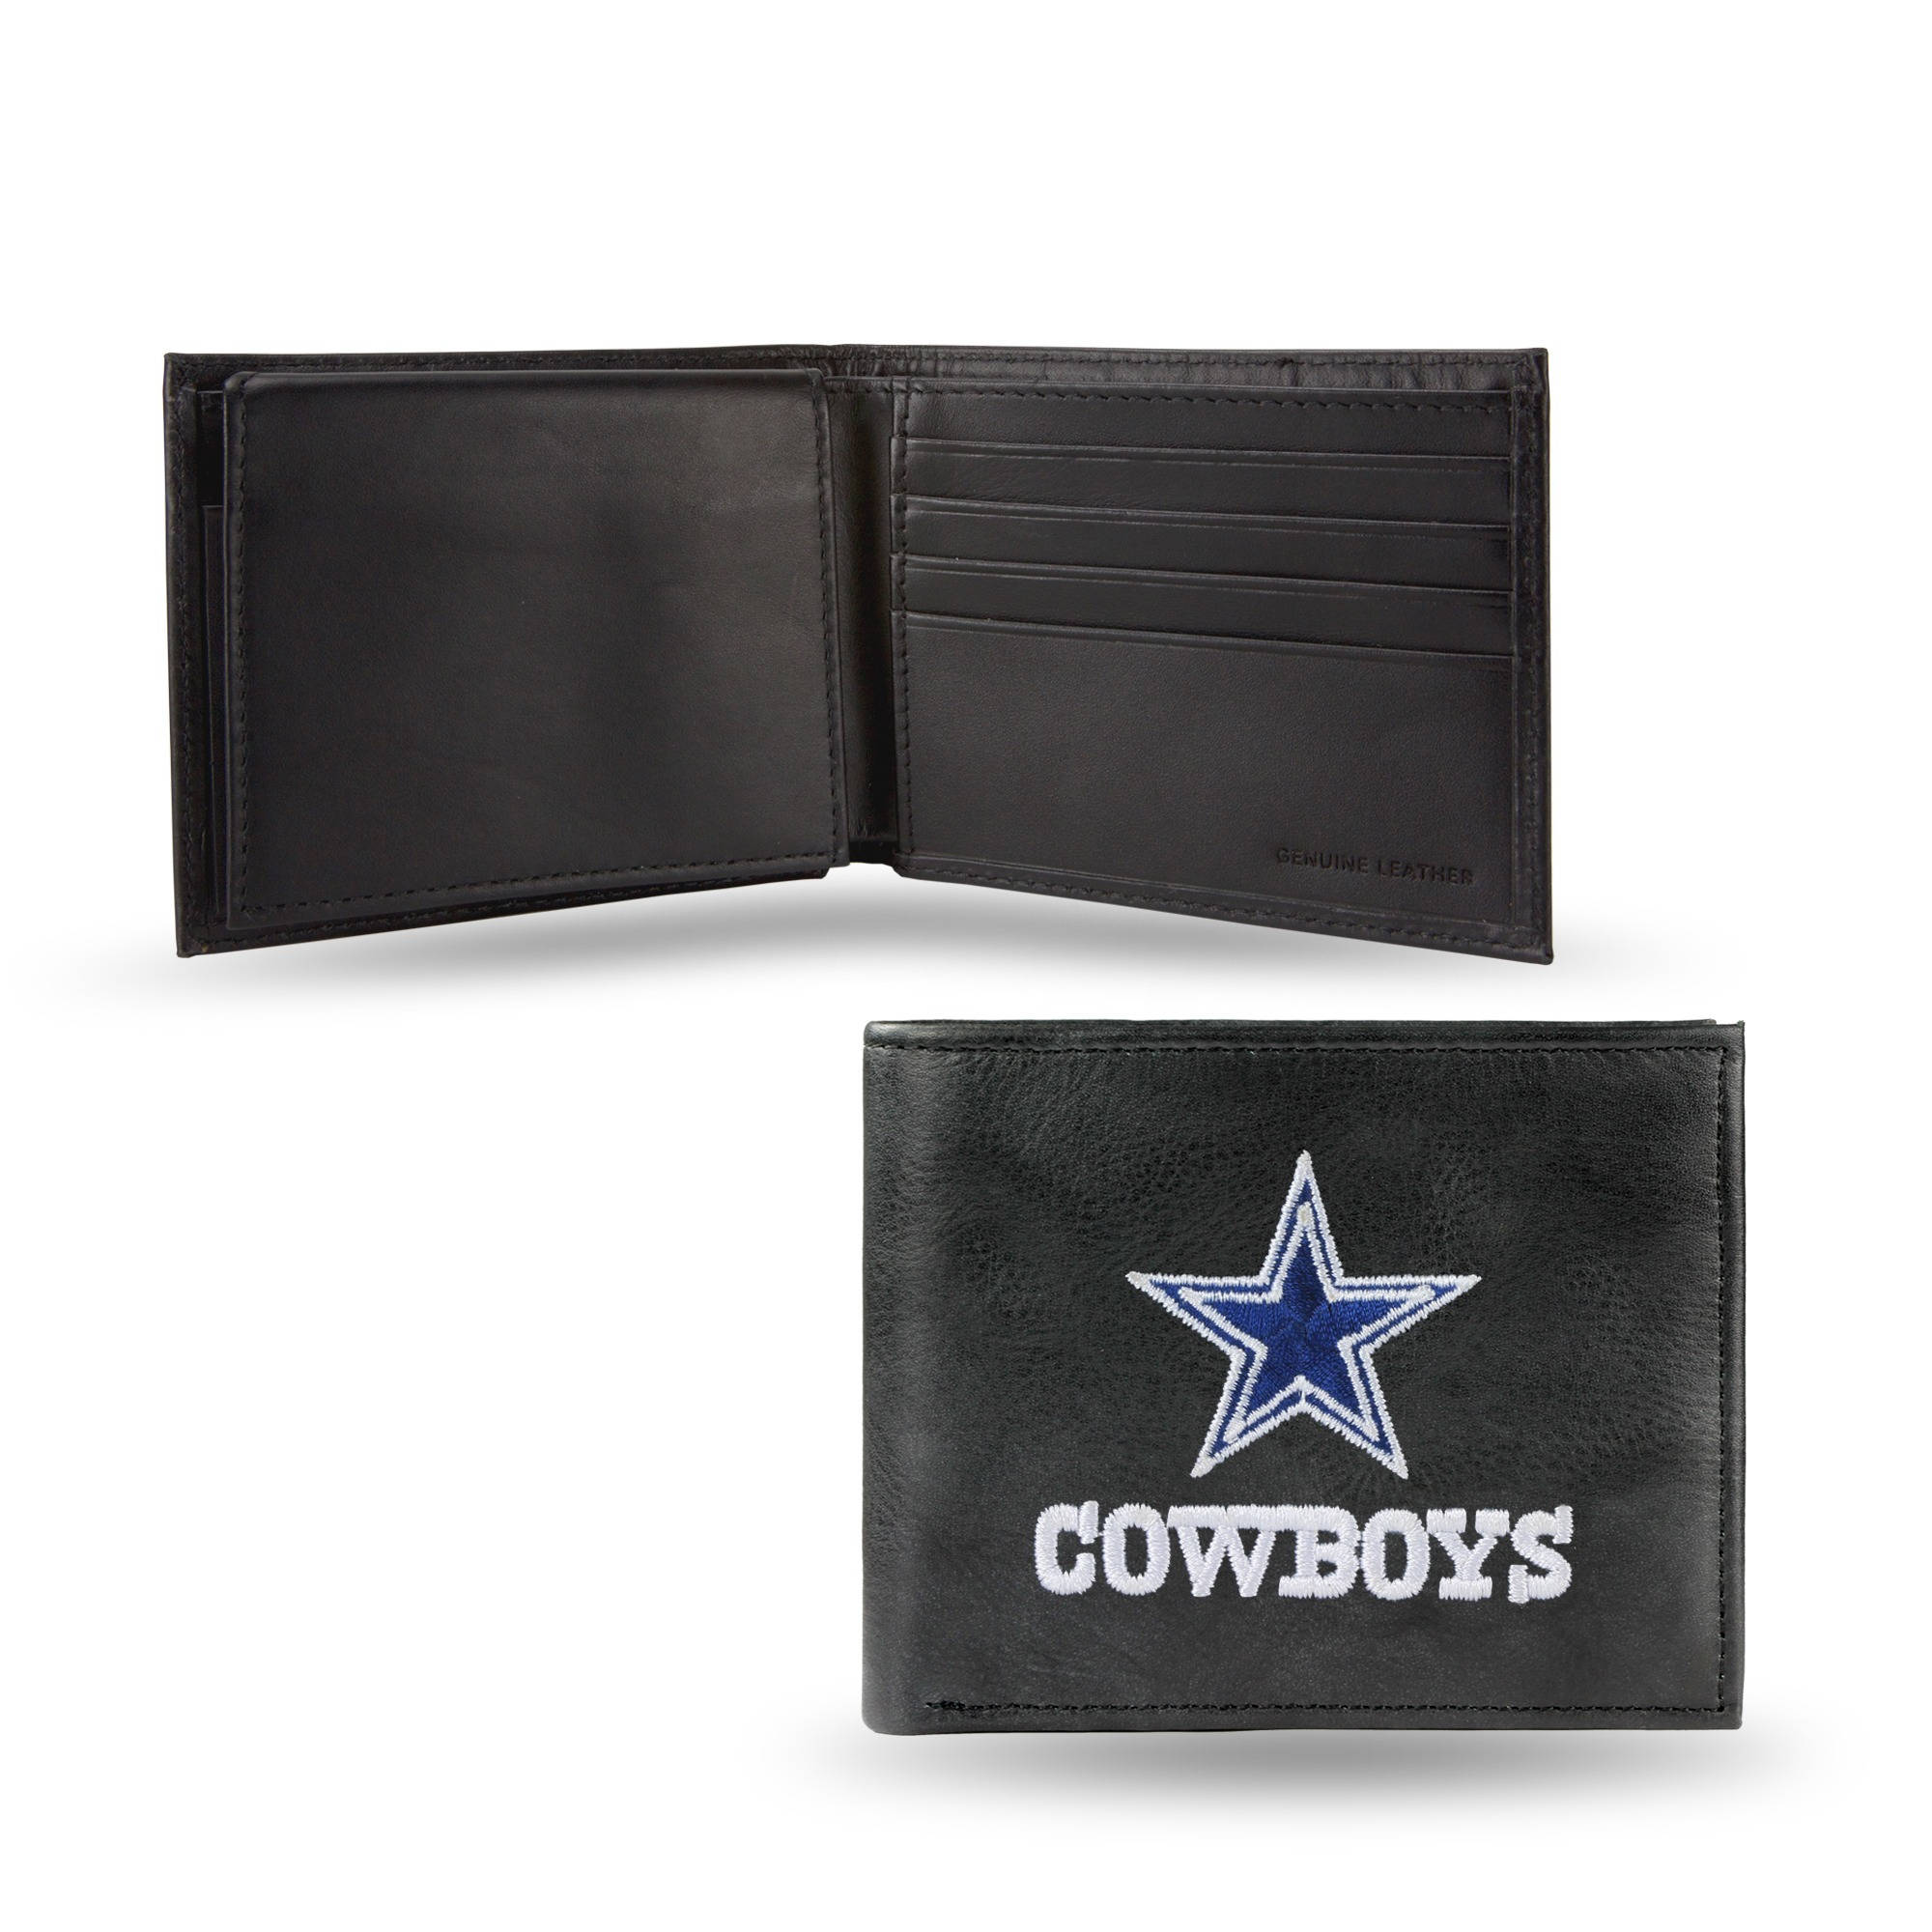 DALLAS COWBOYS EMBROIDERED BILLFOLD - image 2 of 2